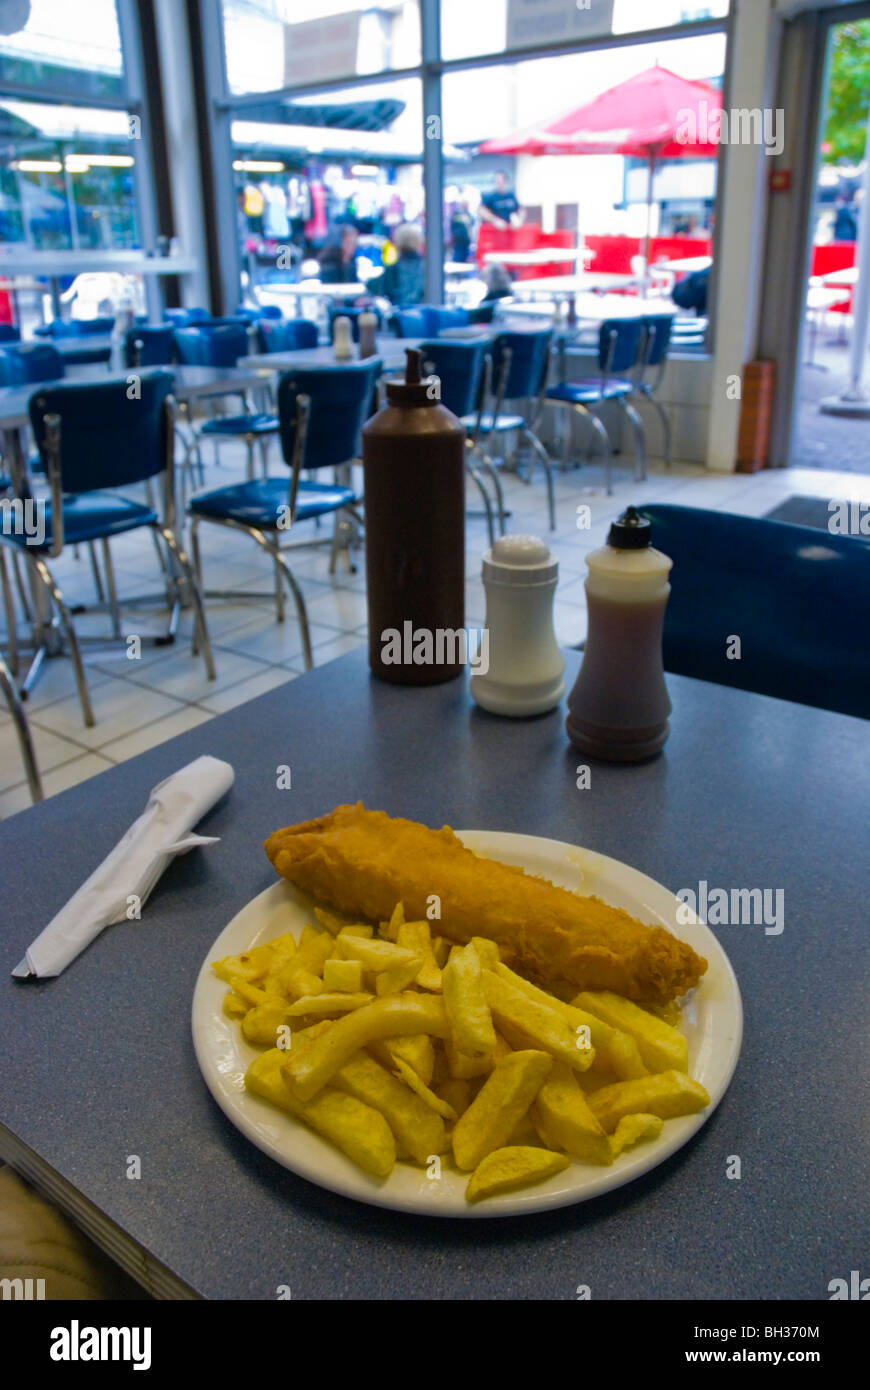 Cod and chips at a chippy in central Birmingham England UK Europe Stock Photo